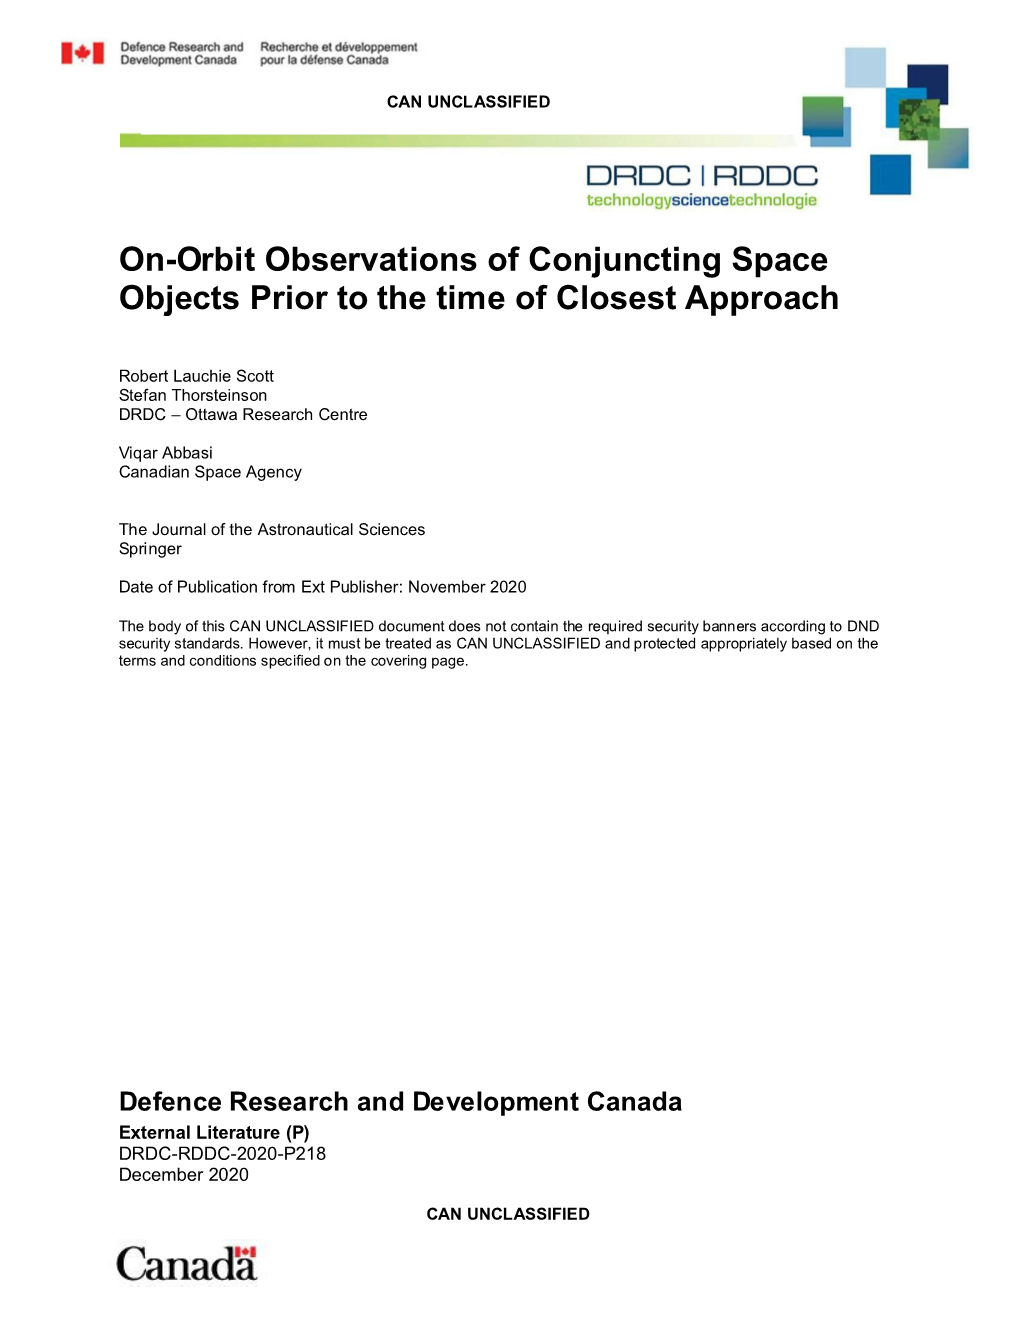 On-Orbit Observations of Conjuncting Space Objects Prior to the Time of Closest Approach